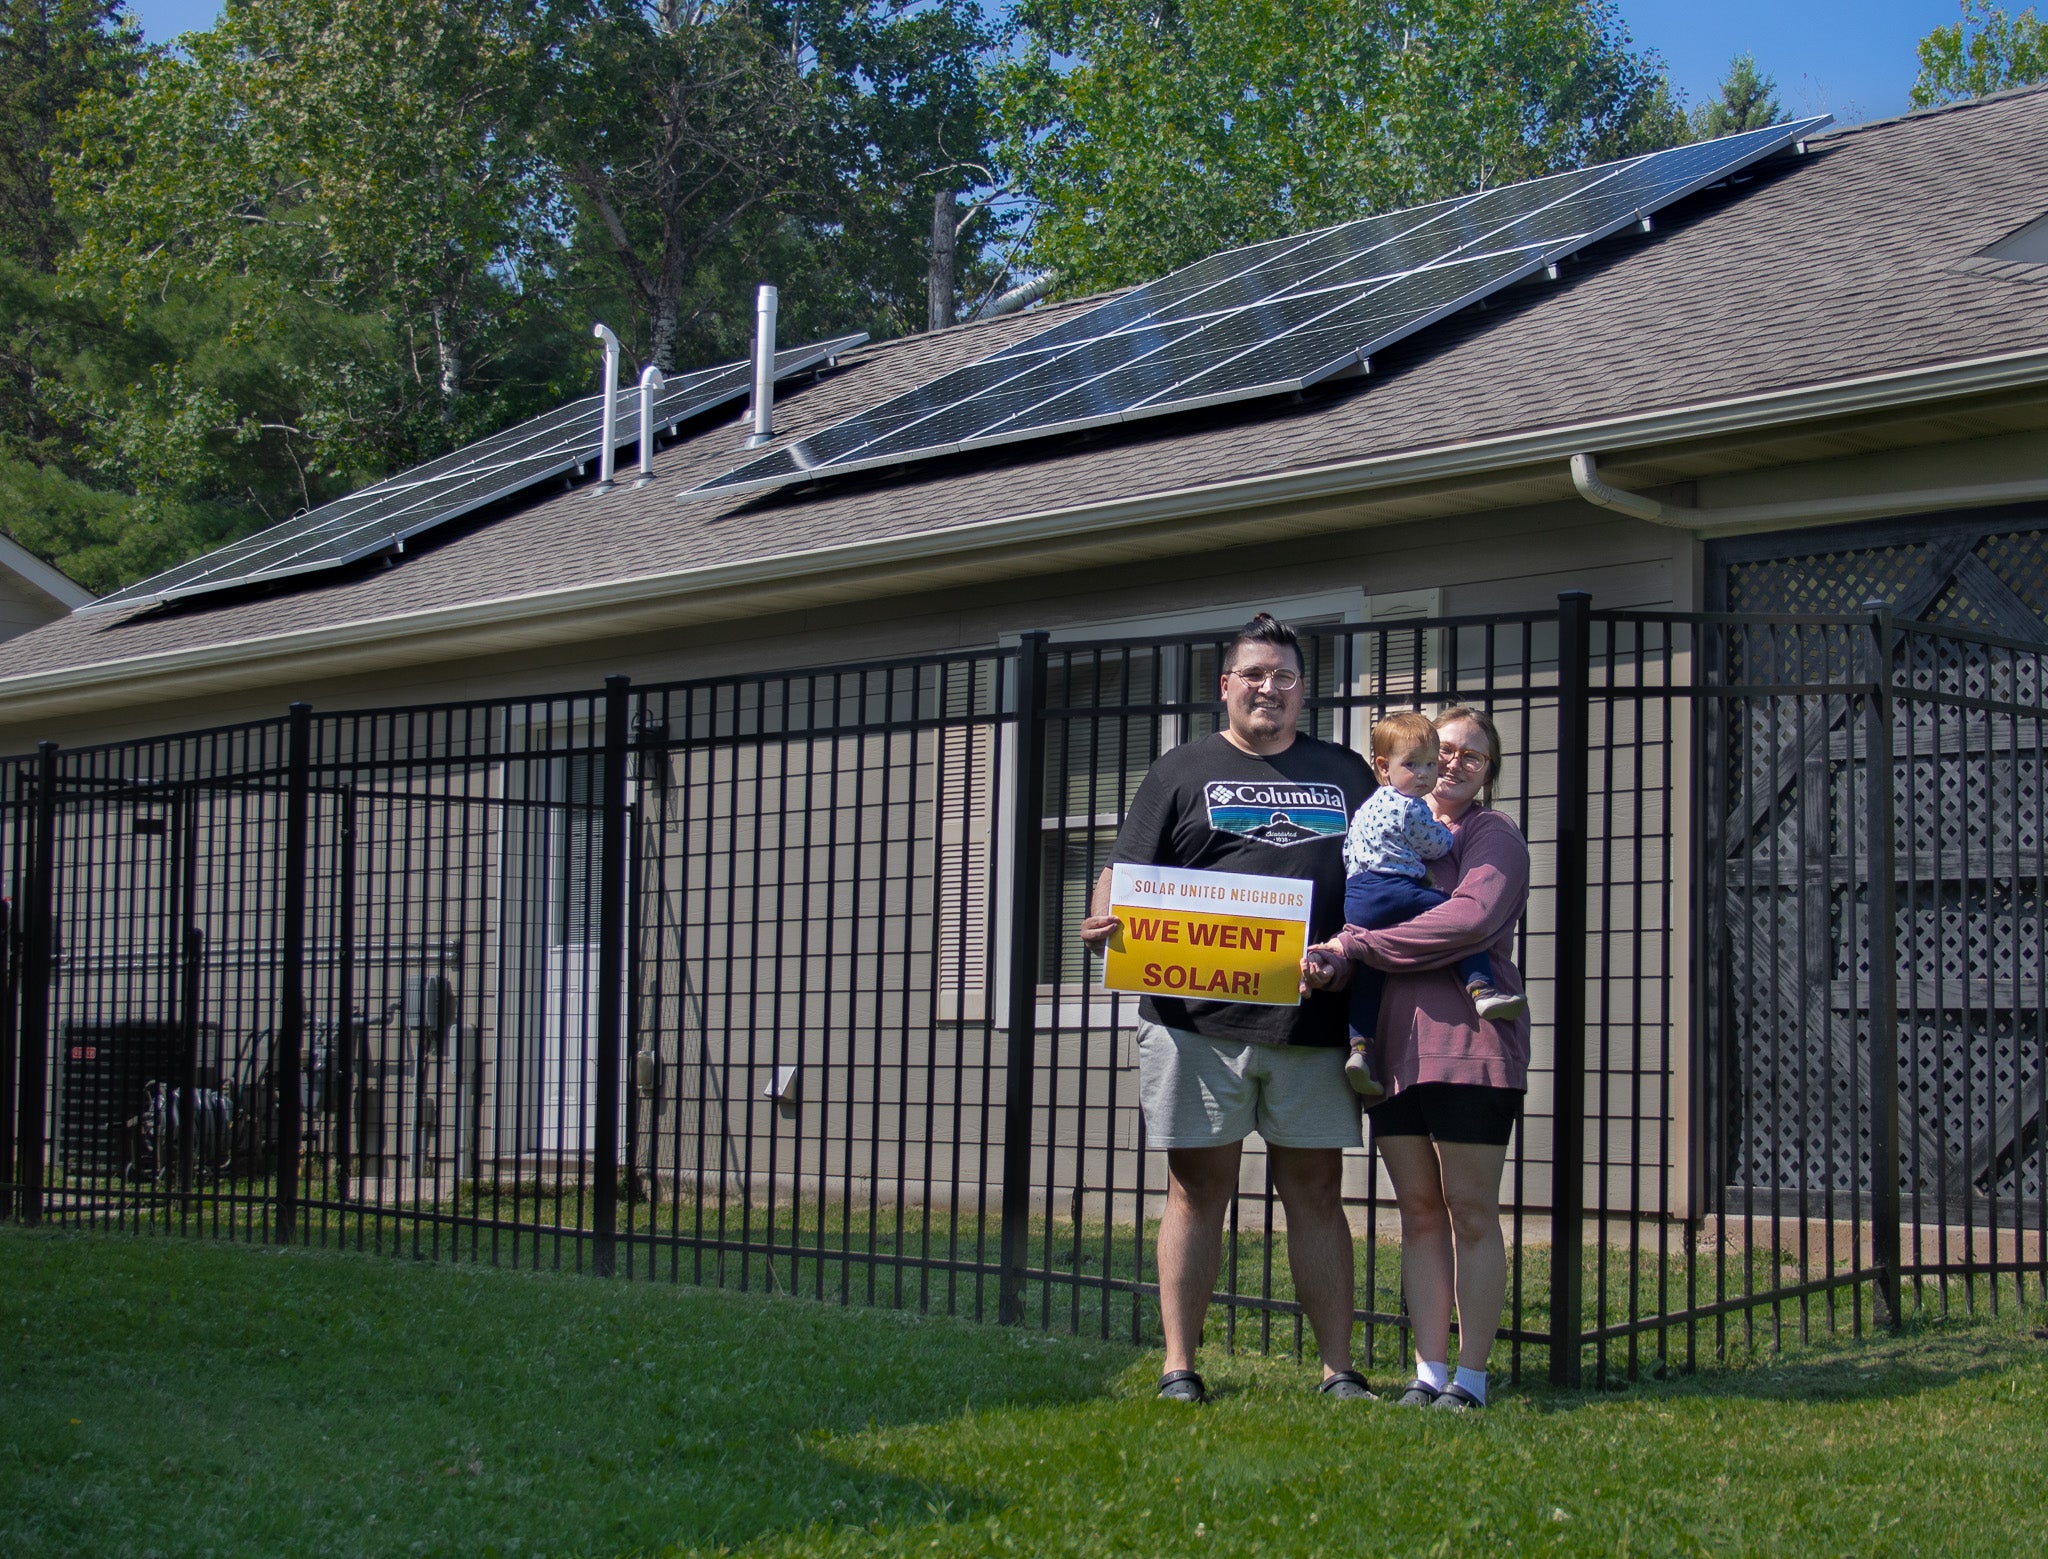 A family with a small child hold a "we went solar!" sign in front of their house with rooftop solar panels.